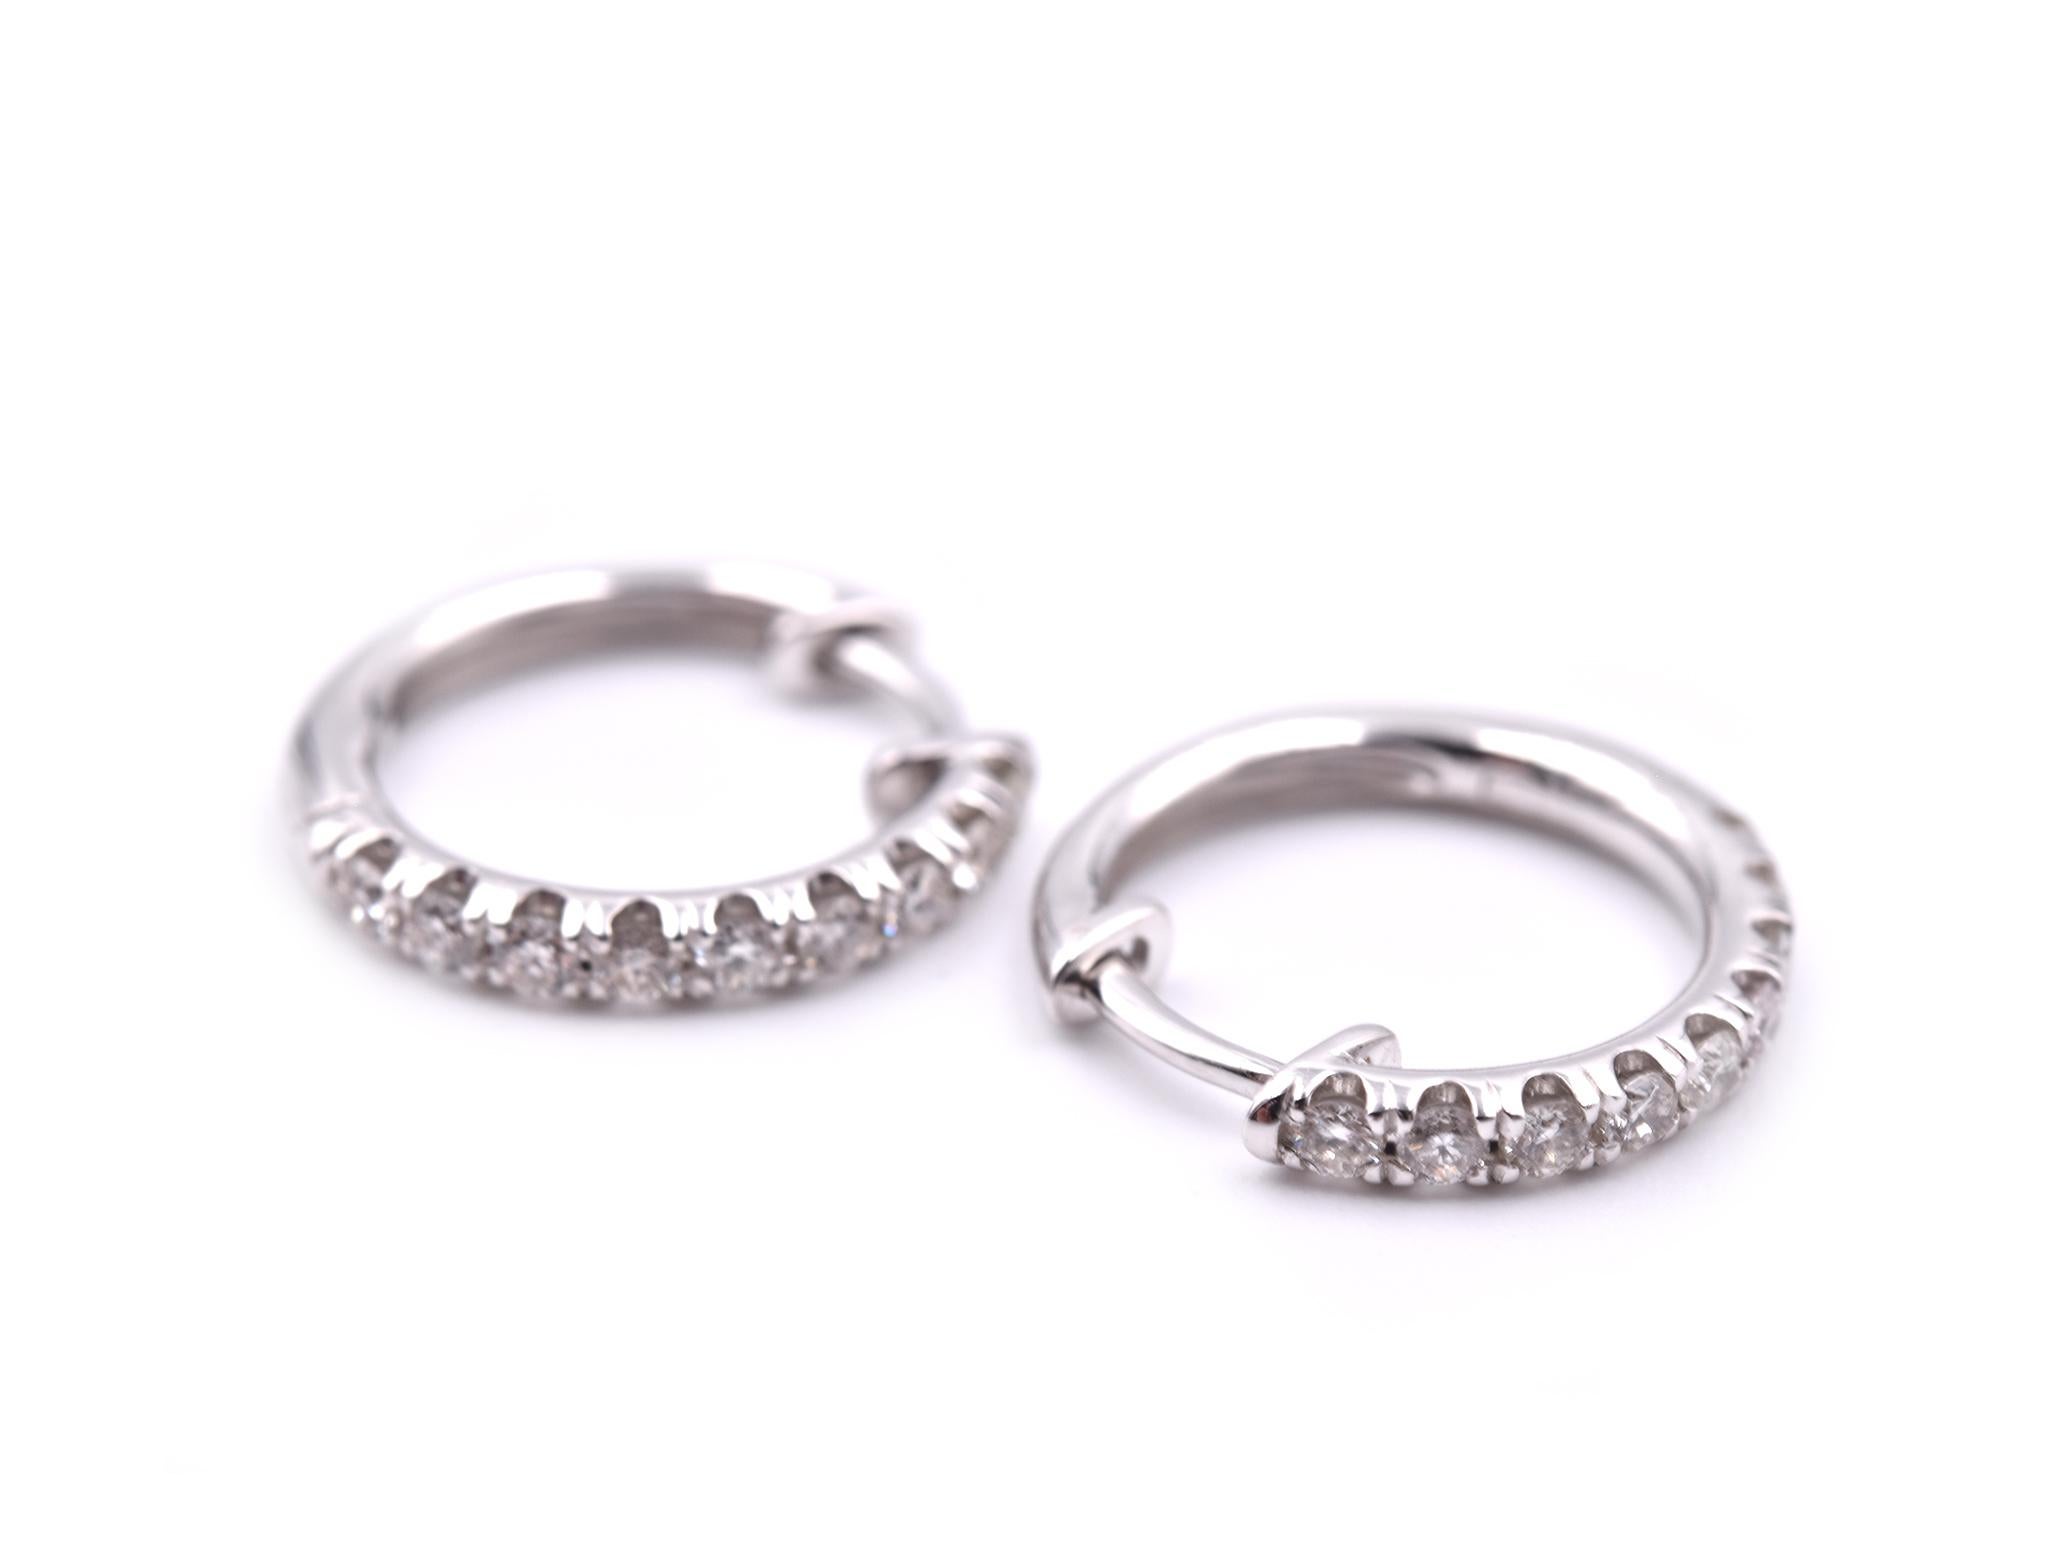 Designer: custom design
Material: 14k white gold
Diamonds: 18 round brilliant cut = 0.46cttw
Color: G
Clarity: VS
Dimensions: earrings are approximately 15.96mm in diameter and 2.23mm wide
Fastenings: huggie
Weight: 2.70 grams
